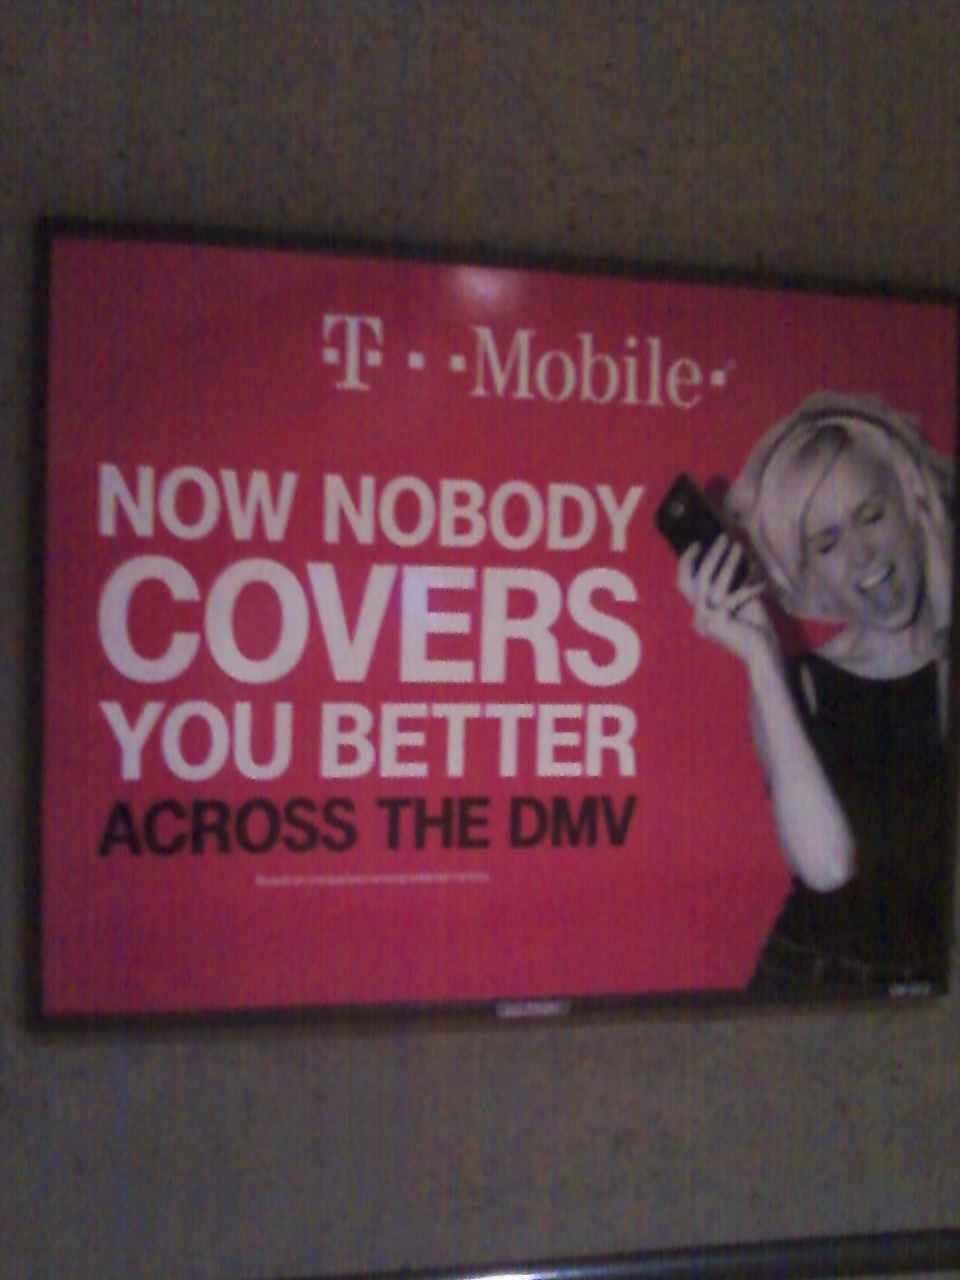 WMATA/DC Metro
T-Mobile Advertisement boasting about T-Mobile's superior coverage in the
DC Metro area. But we've had more drops with TMO in downtown DC, as well
as poor coverage spots (like at the outdoor lot of the Georgetown Safeway)
than with any other carrier, so T-Mobile's claims are dubious at best. For
further details, please visit www.wirelessnotes.org.